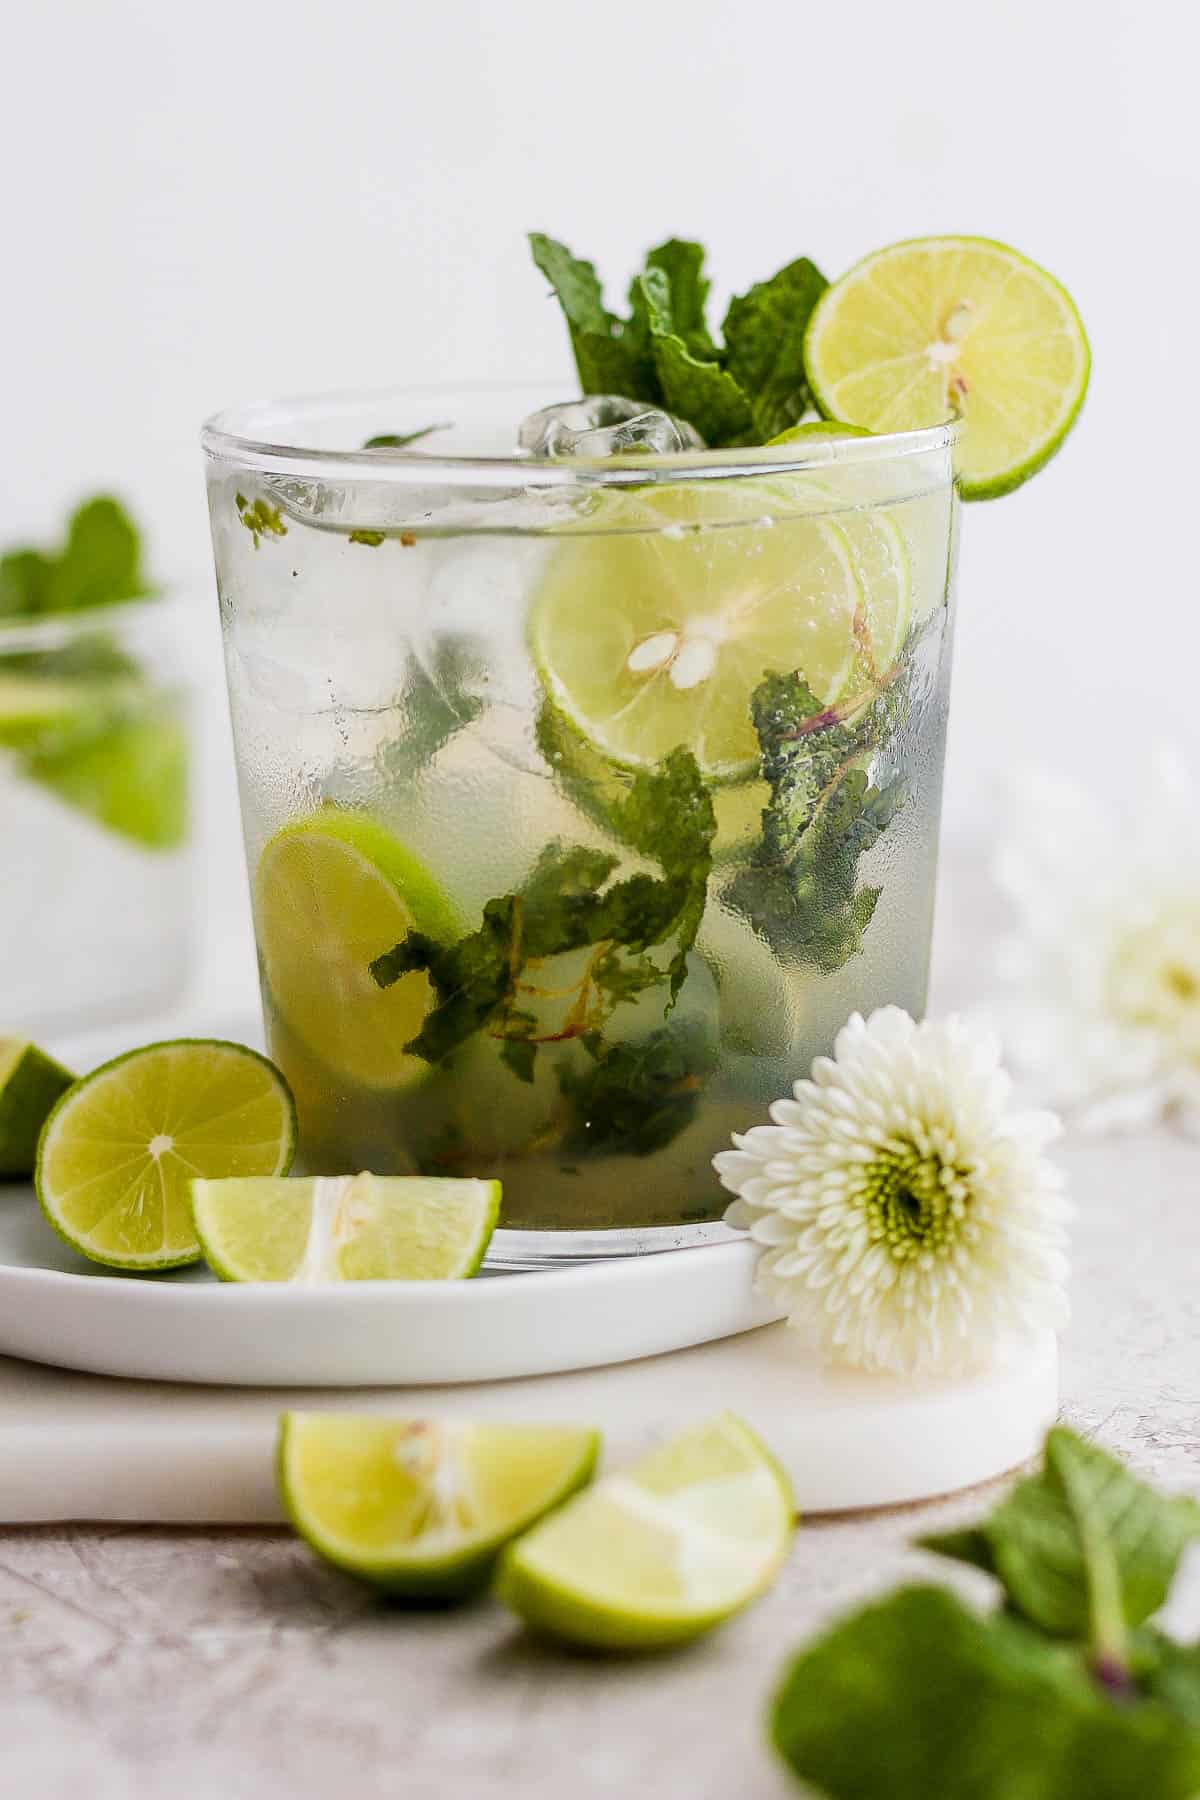 A fully garnished mojito in a clear glass.